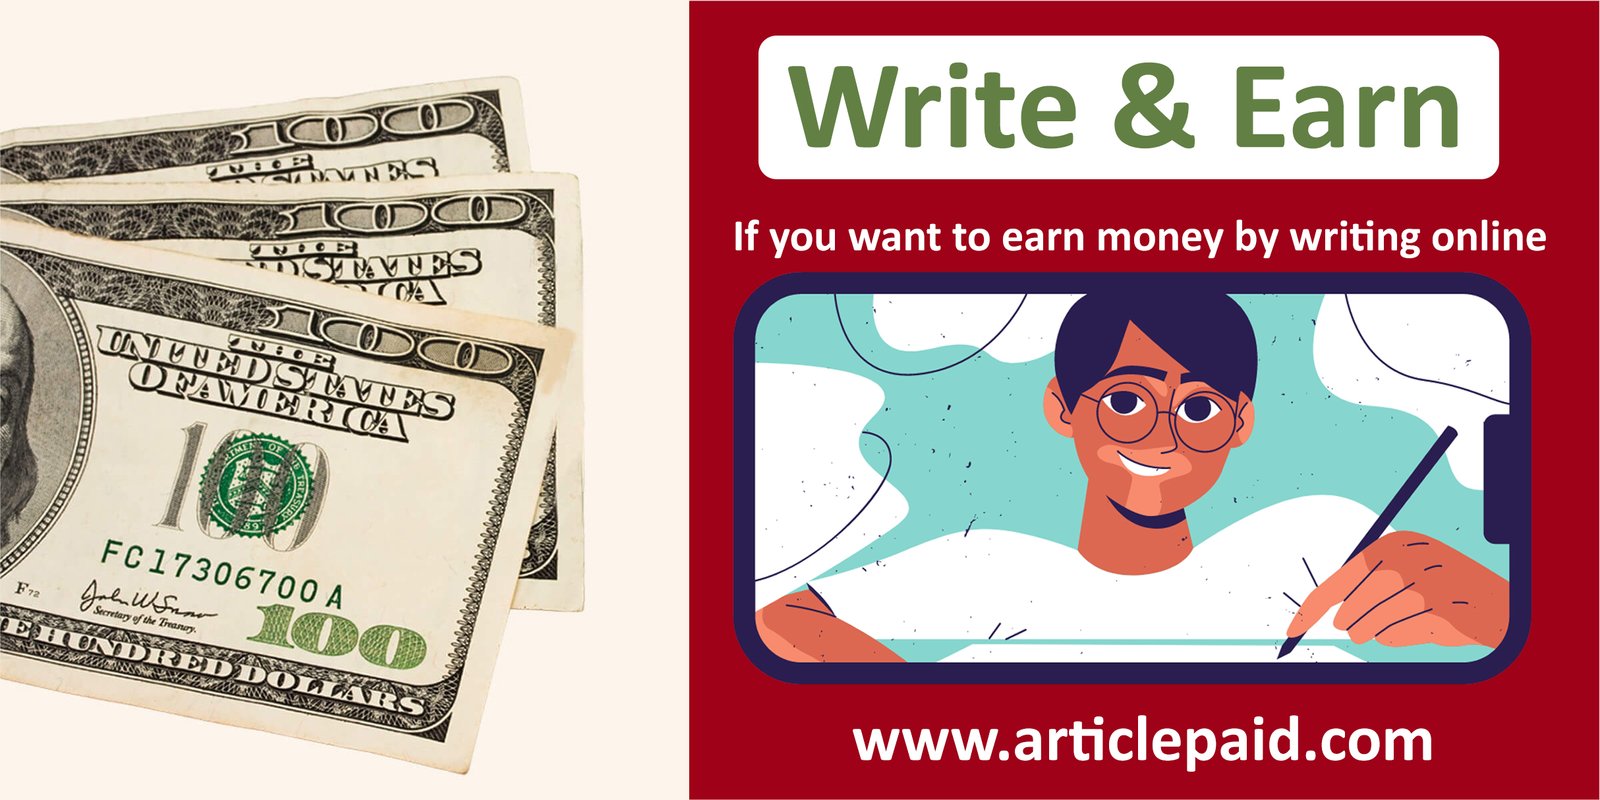 If you want to earn money by writing online